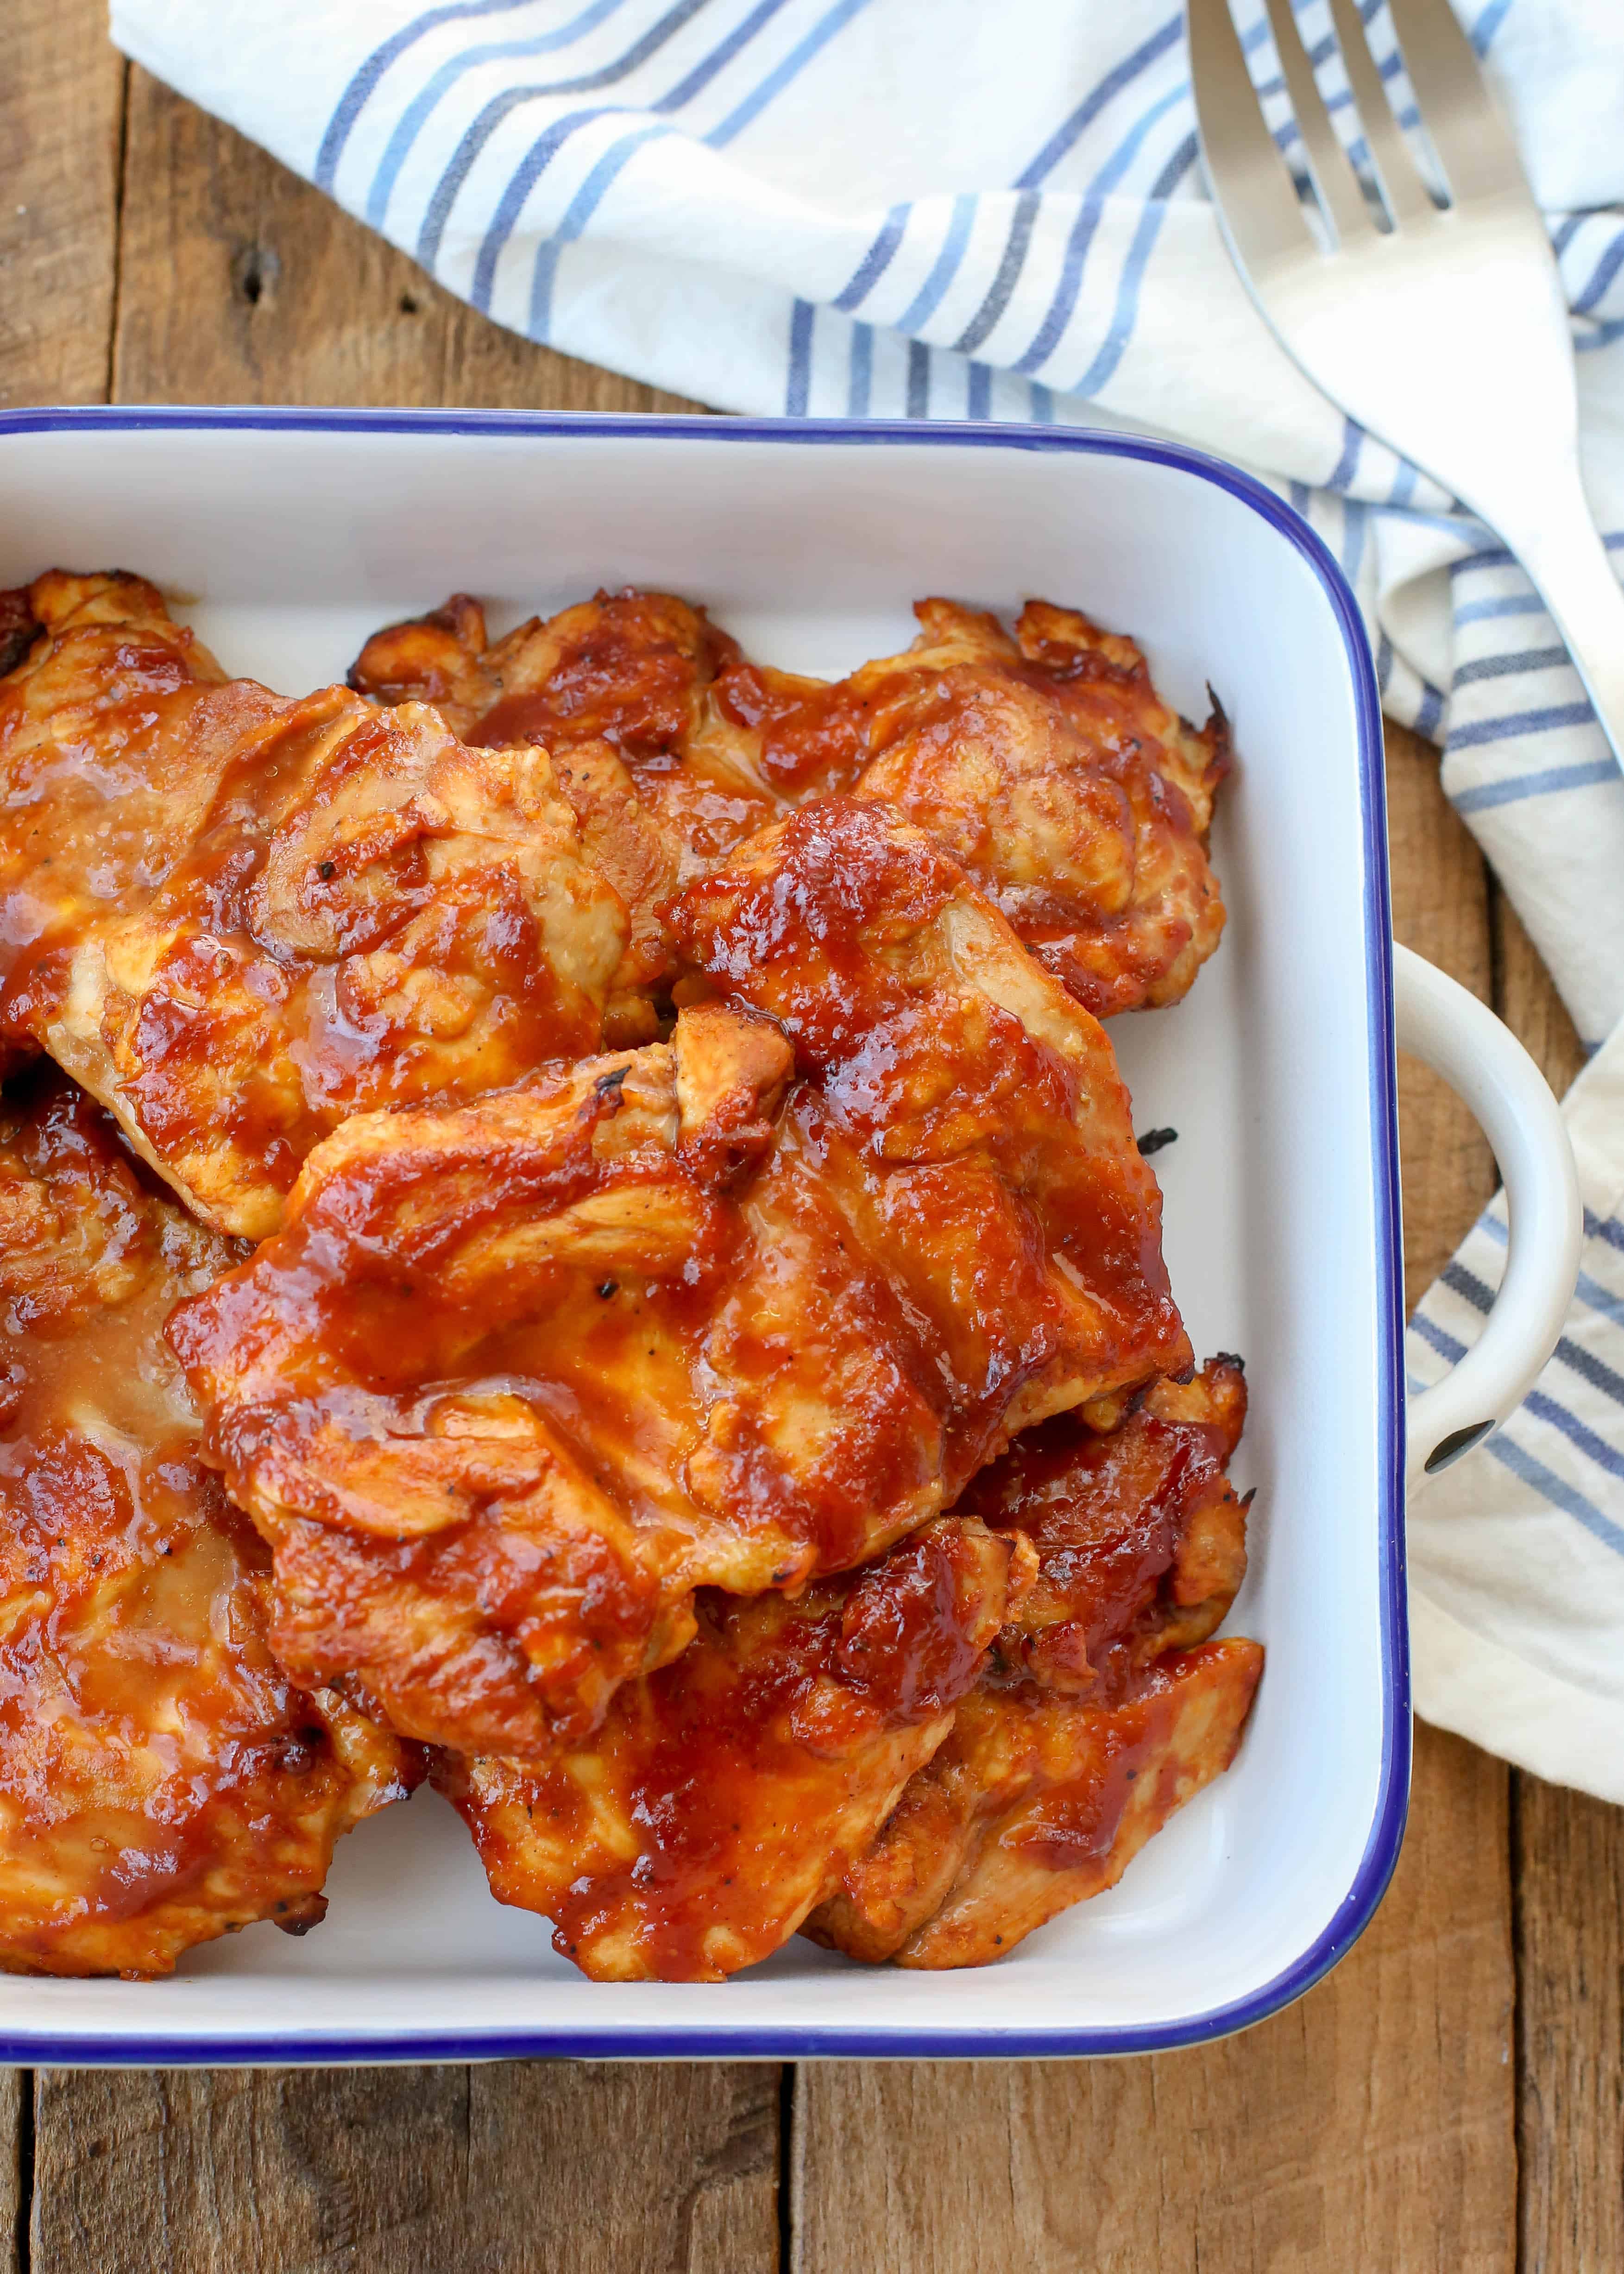 Oven Broiled Chicken with Barbecue Sauce